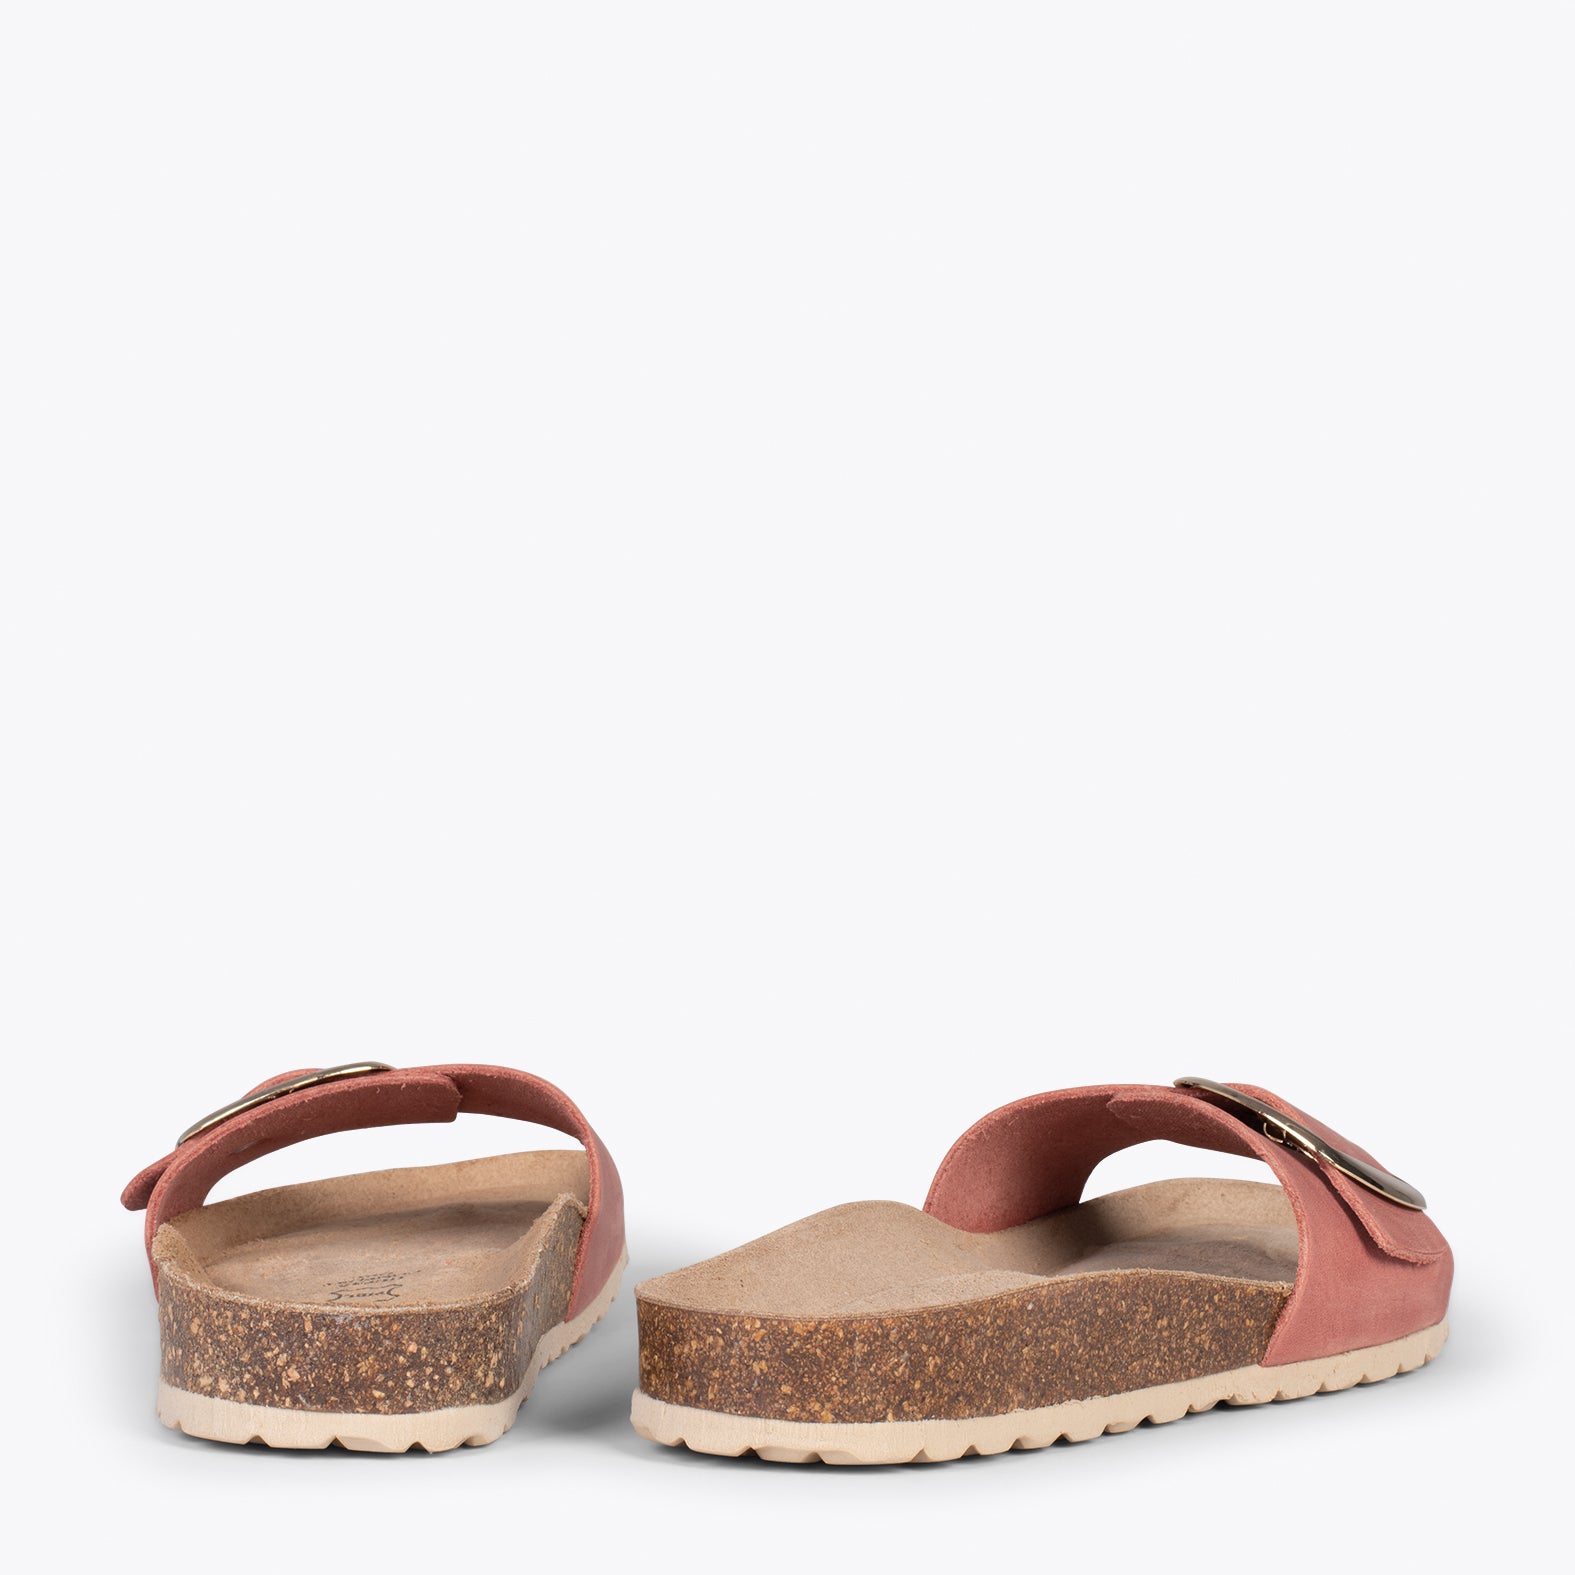 CLAVEL – CORAL leather slides with buckle